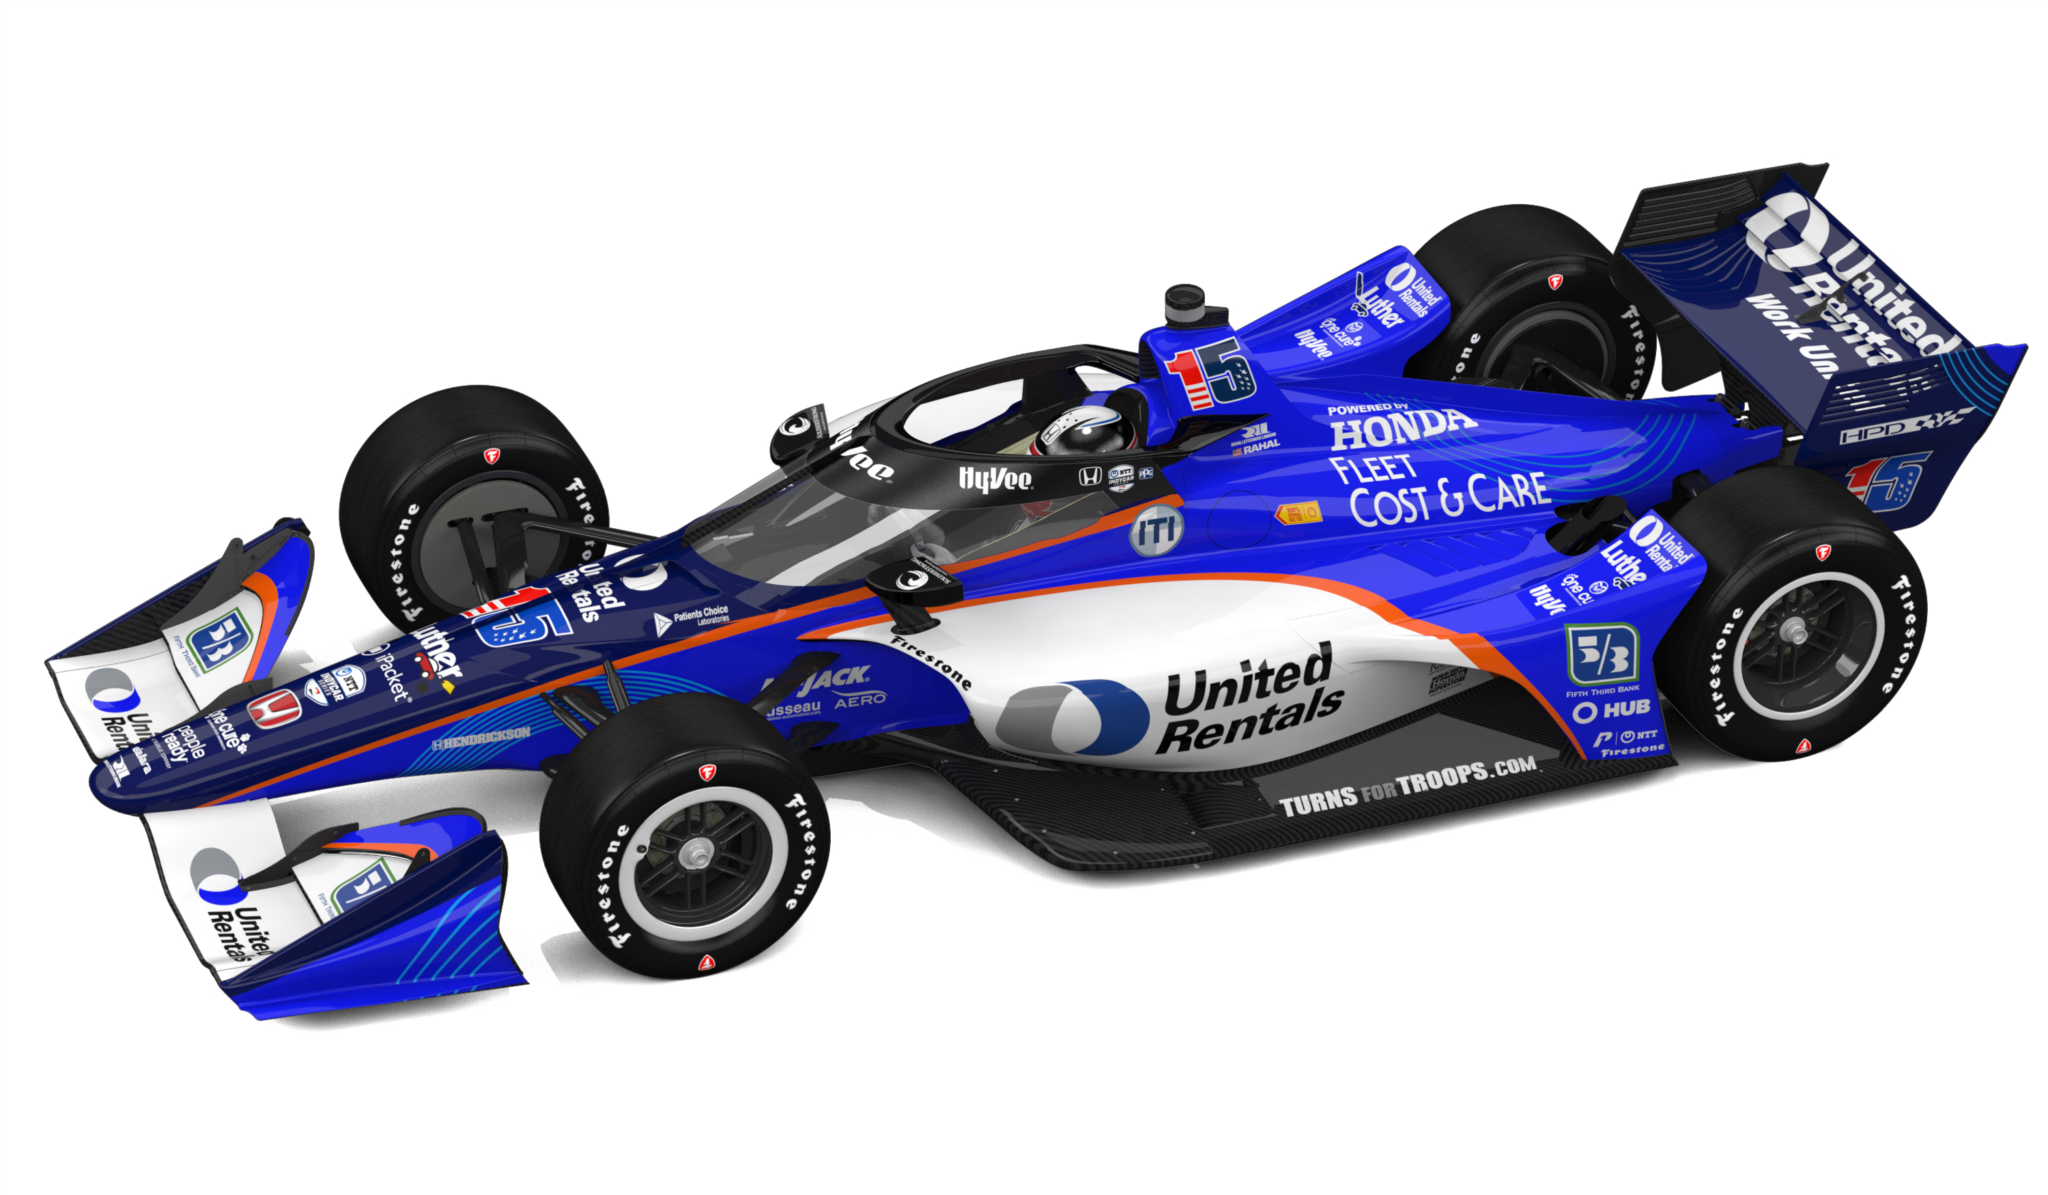 Fleet Cost & Care and ITI Team Up to Sponsor the No. 15 Indy Car at the